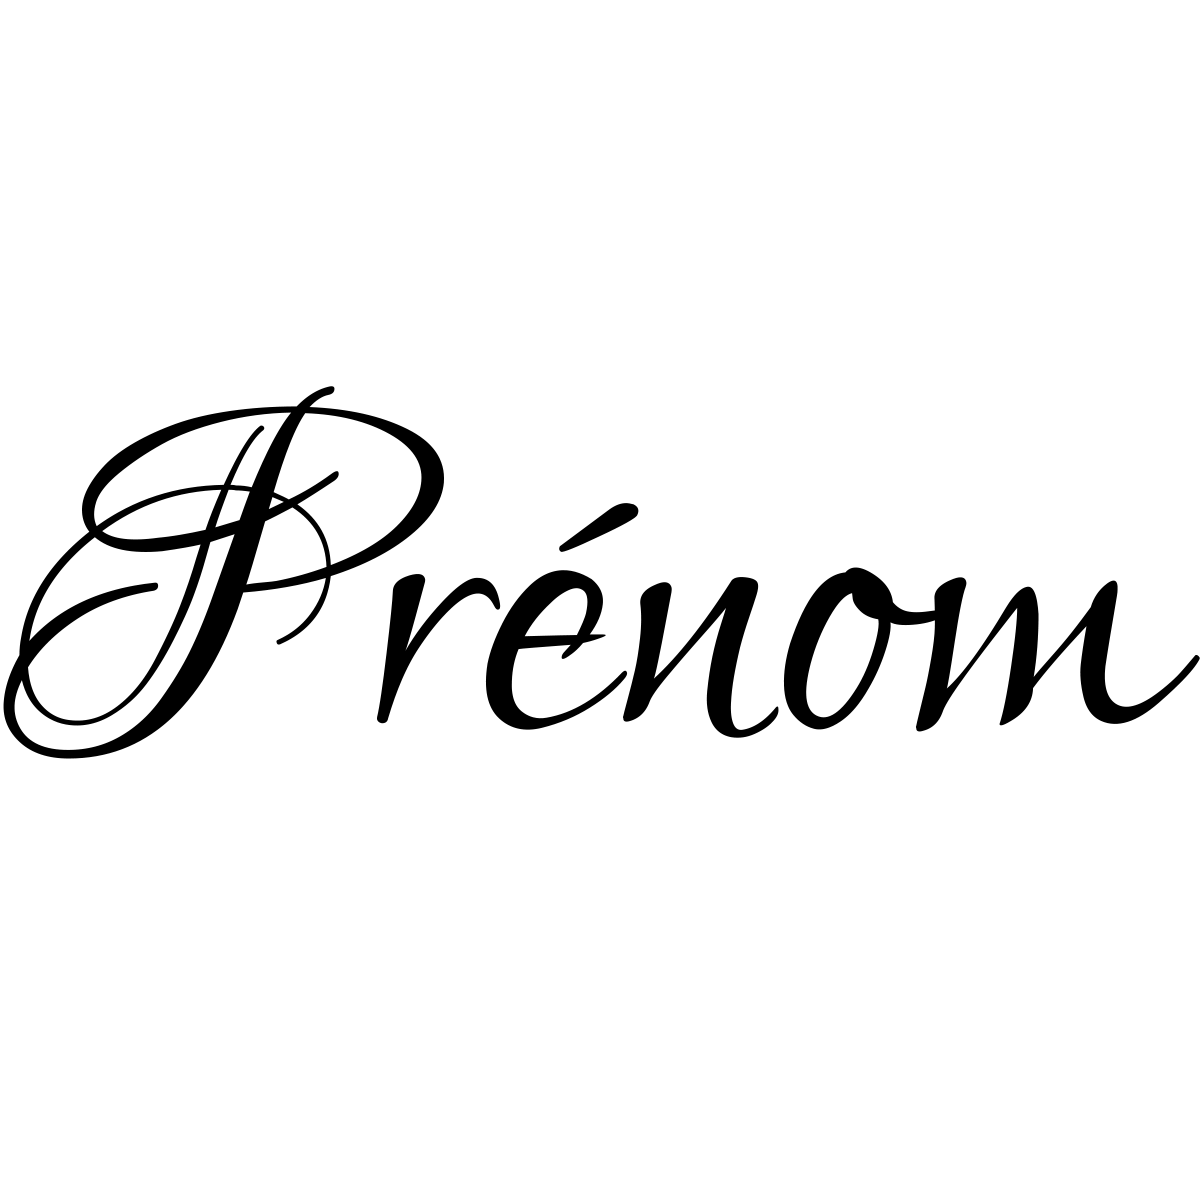 https://www.ambiance-sticker.com/images/Image/sticker-prenom-personnalise-calligraphie-splendide-ambiance-sticker-name_acryle.png